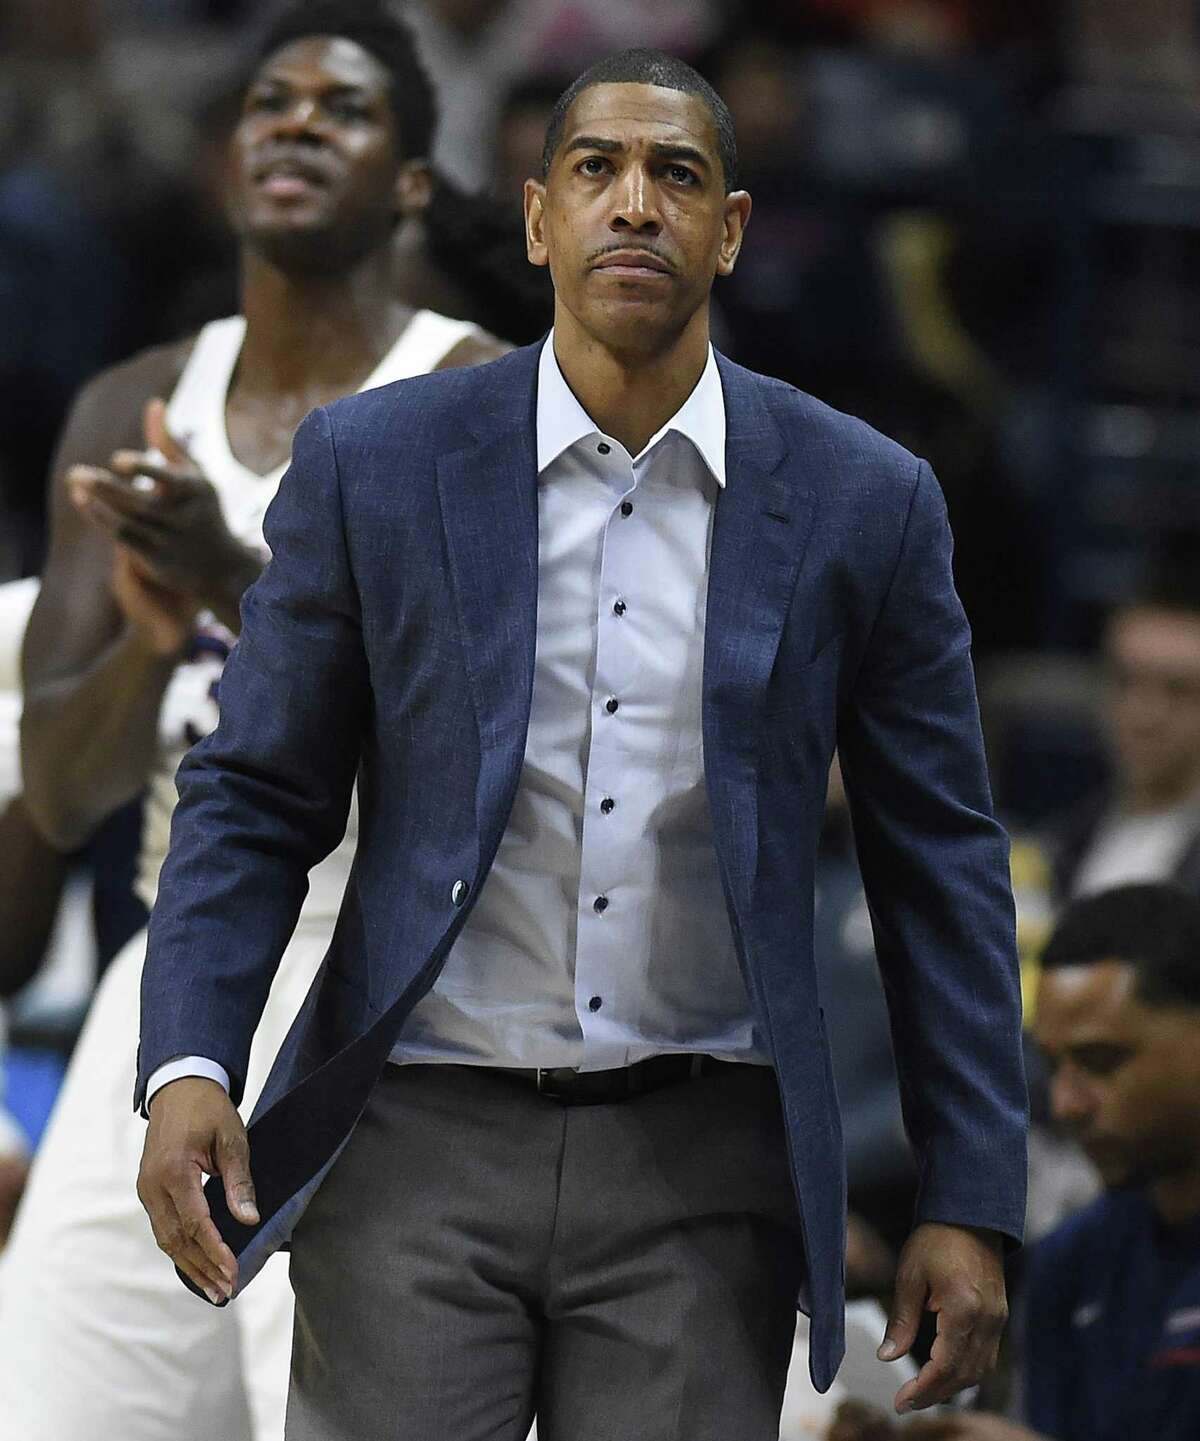 Lawyers for Kevin Ollie refute many of the claims that caused him to lose job as UConn coach.